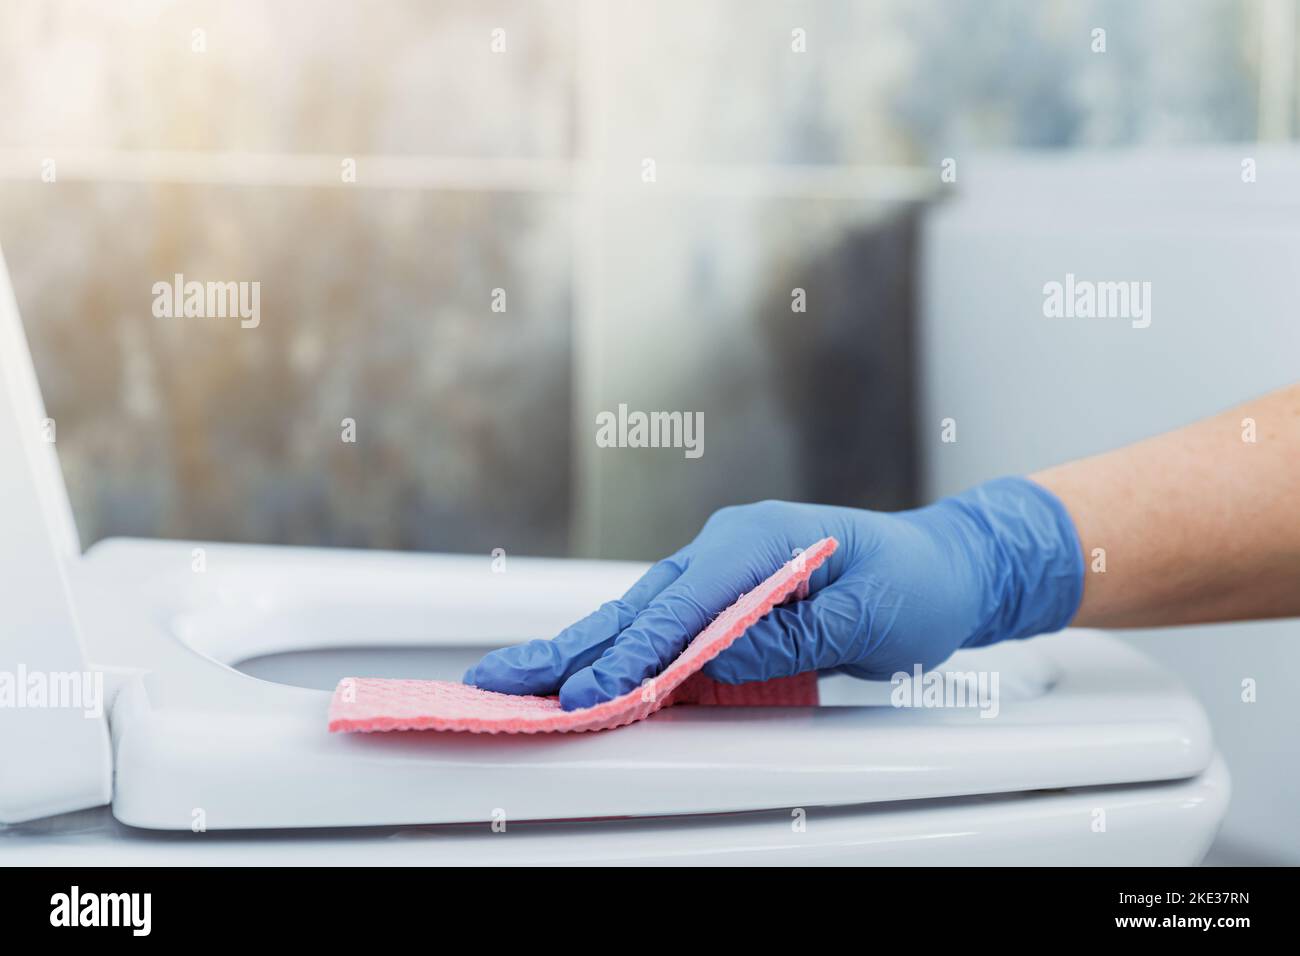 Cropped image view with close up on woman hands gloved in rubber protective gloves. Housewife cleaning toilet bowl, seat with pink cloth, wipe in bathroom or modern public restroom with blue grey tile Stock Photo